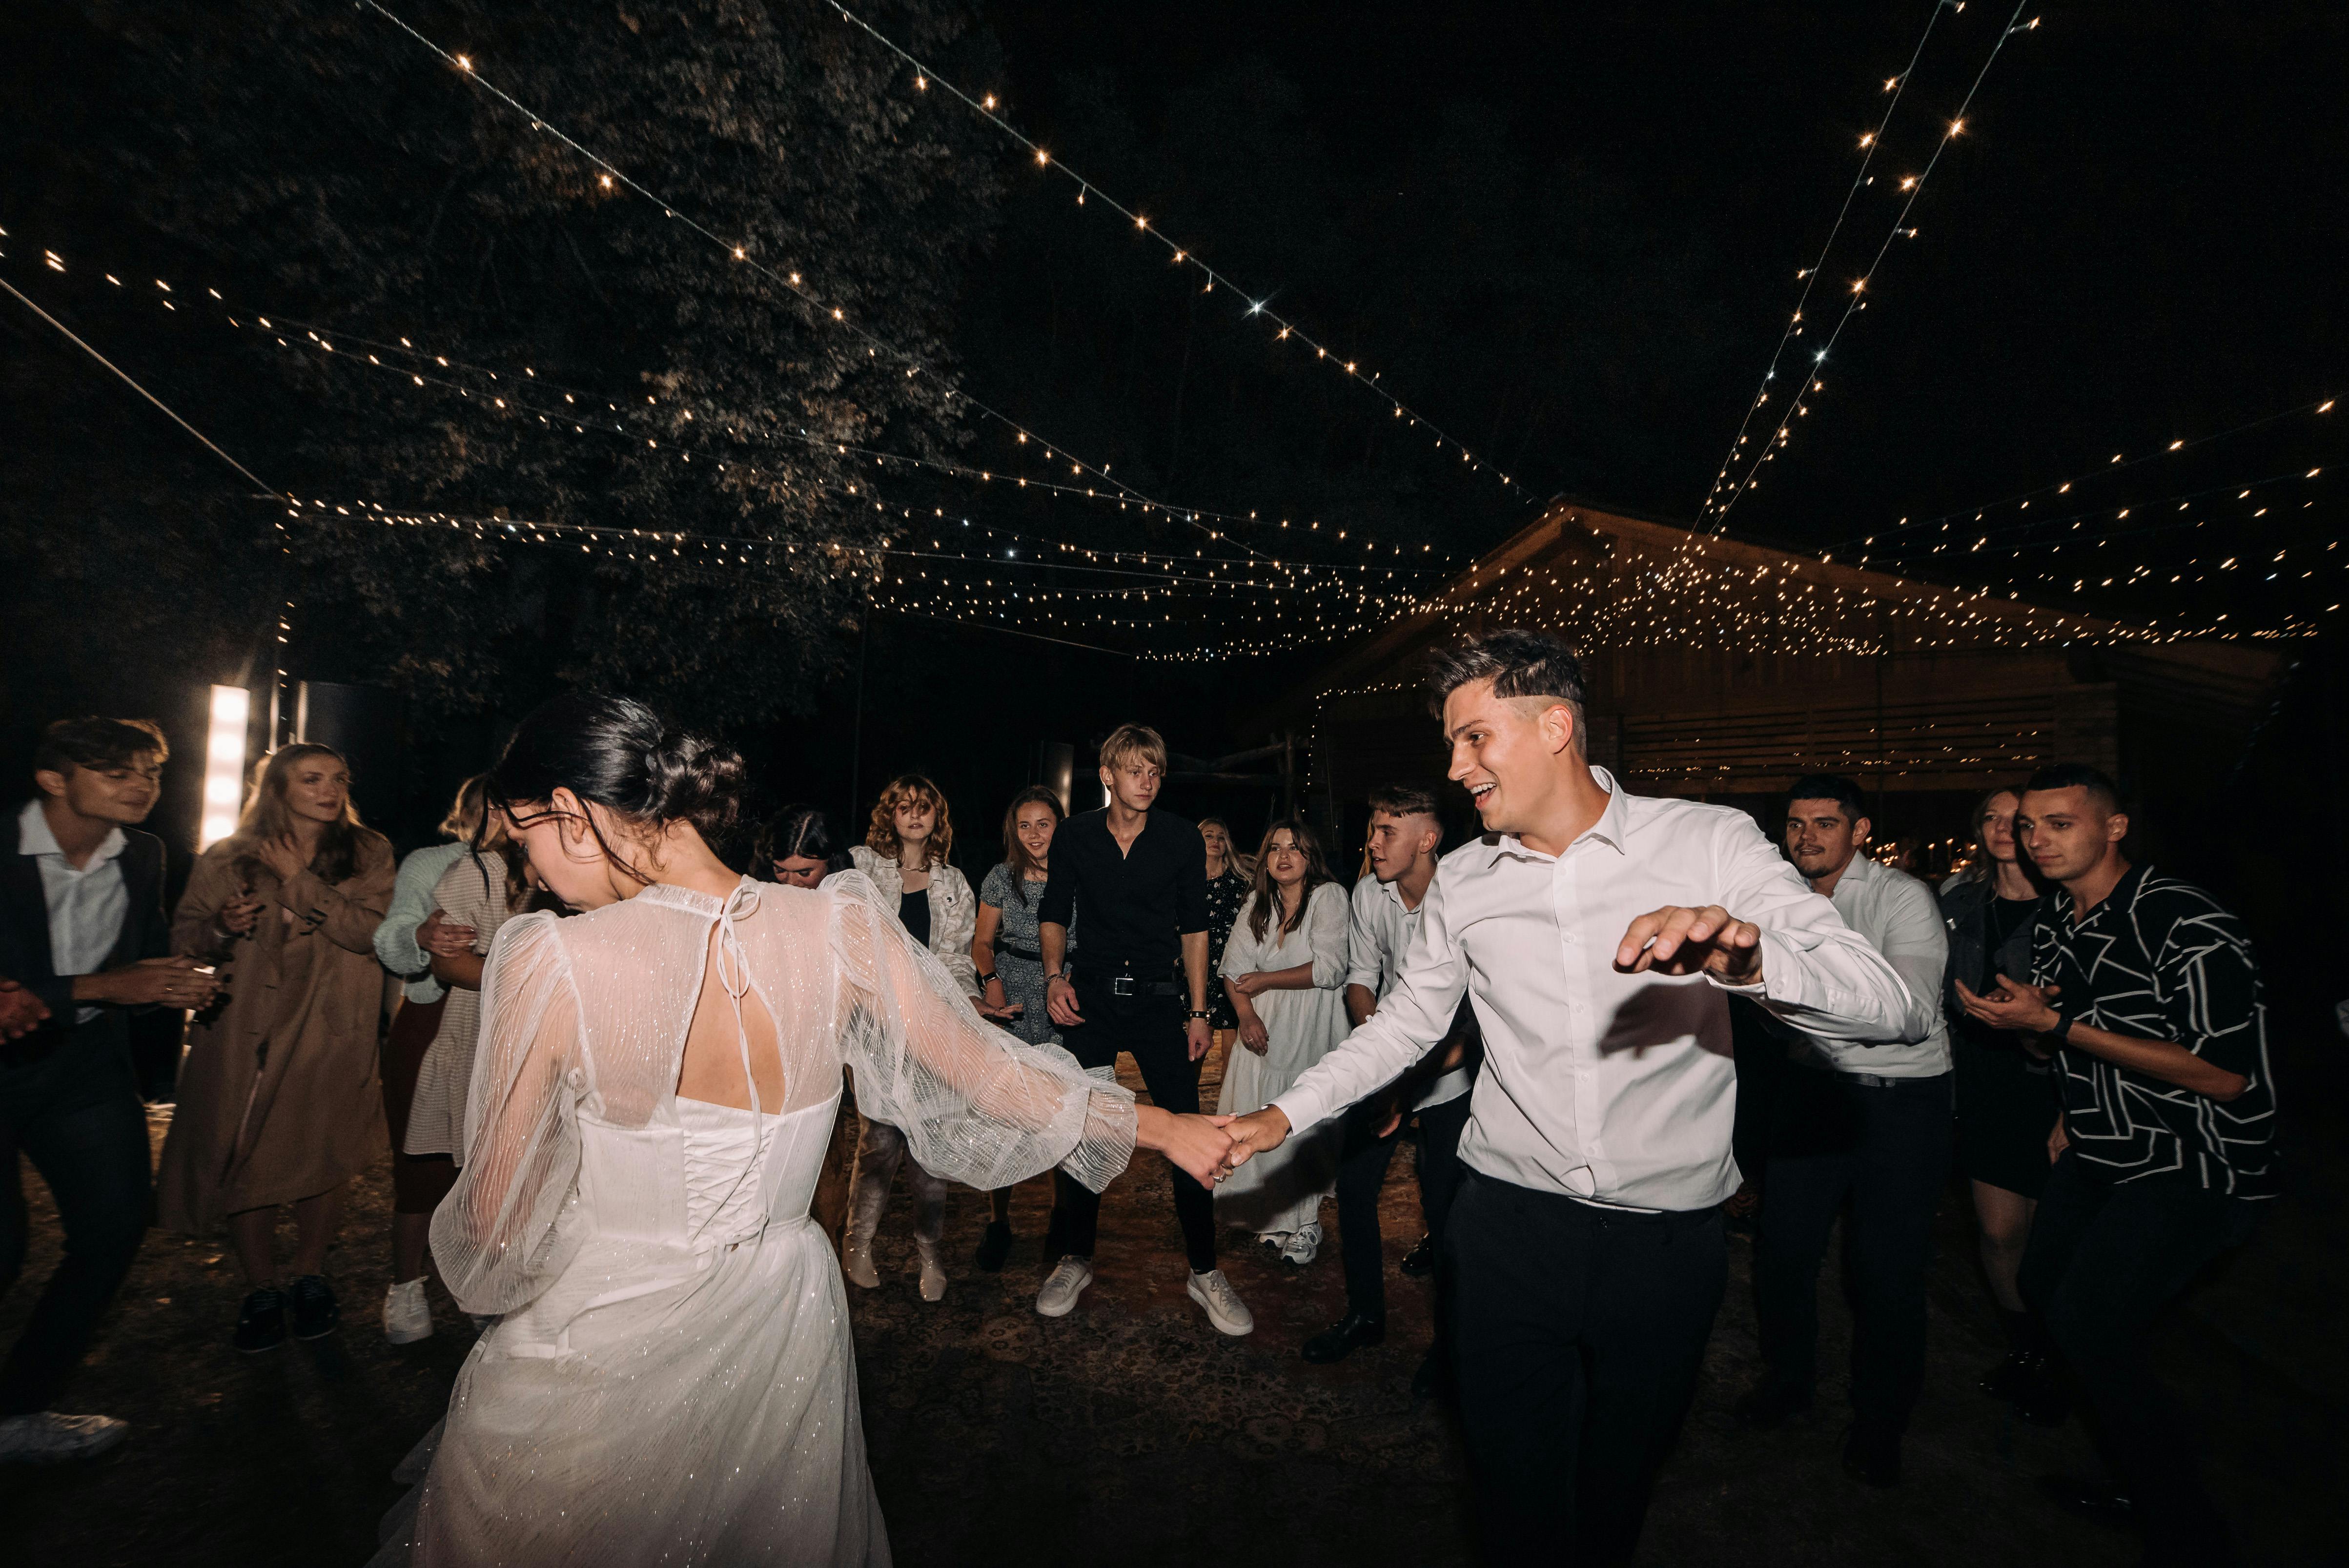 Emily and James sharing their first dance, surrounded by love | Source: Pexels